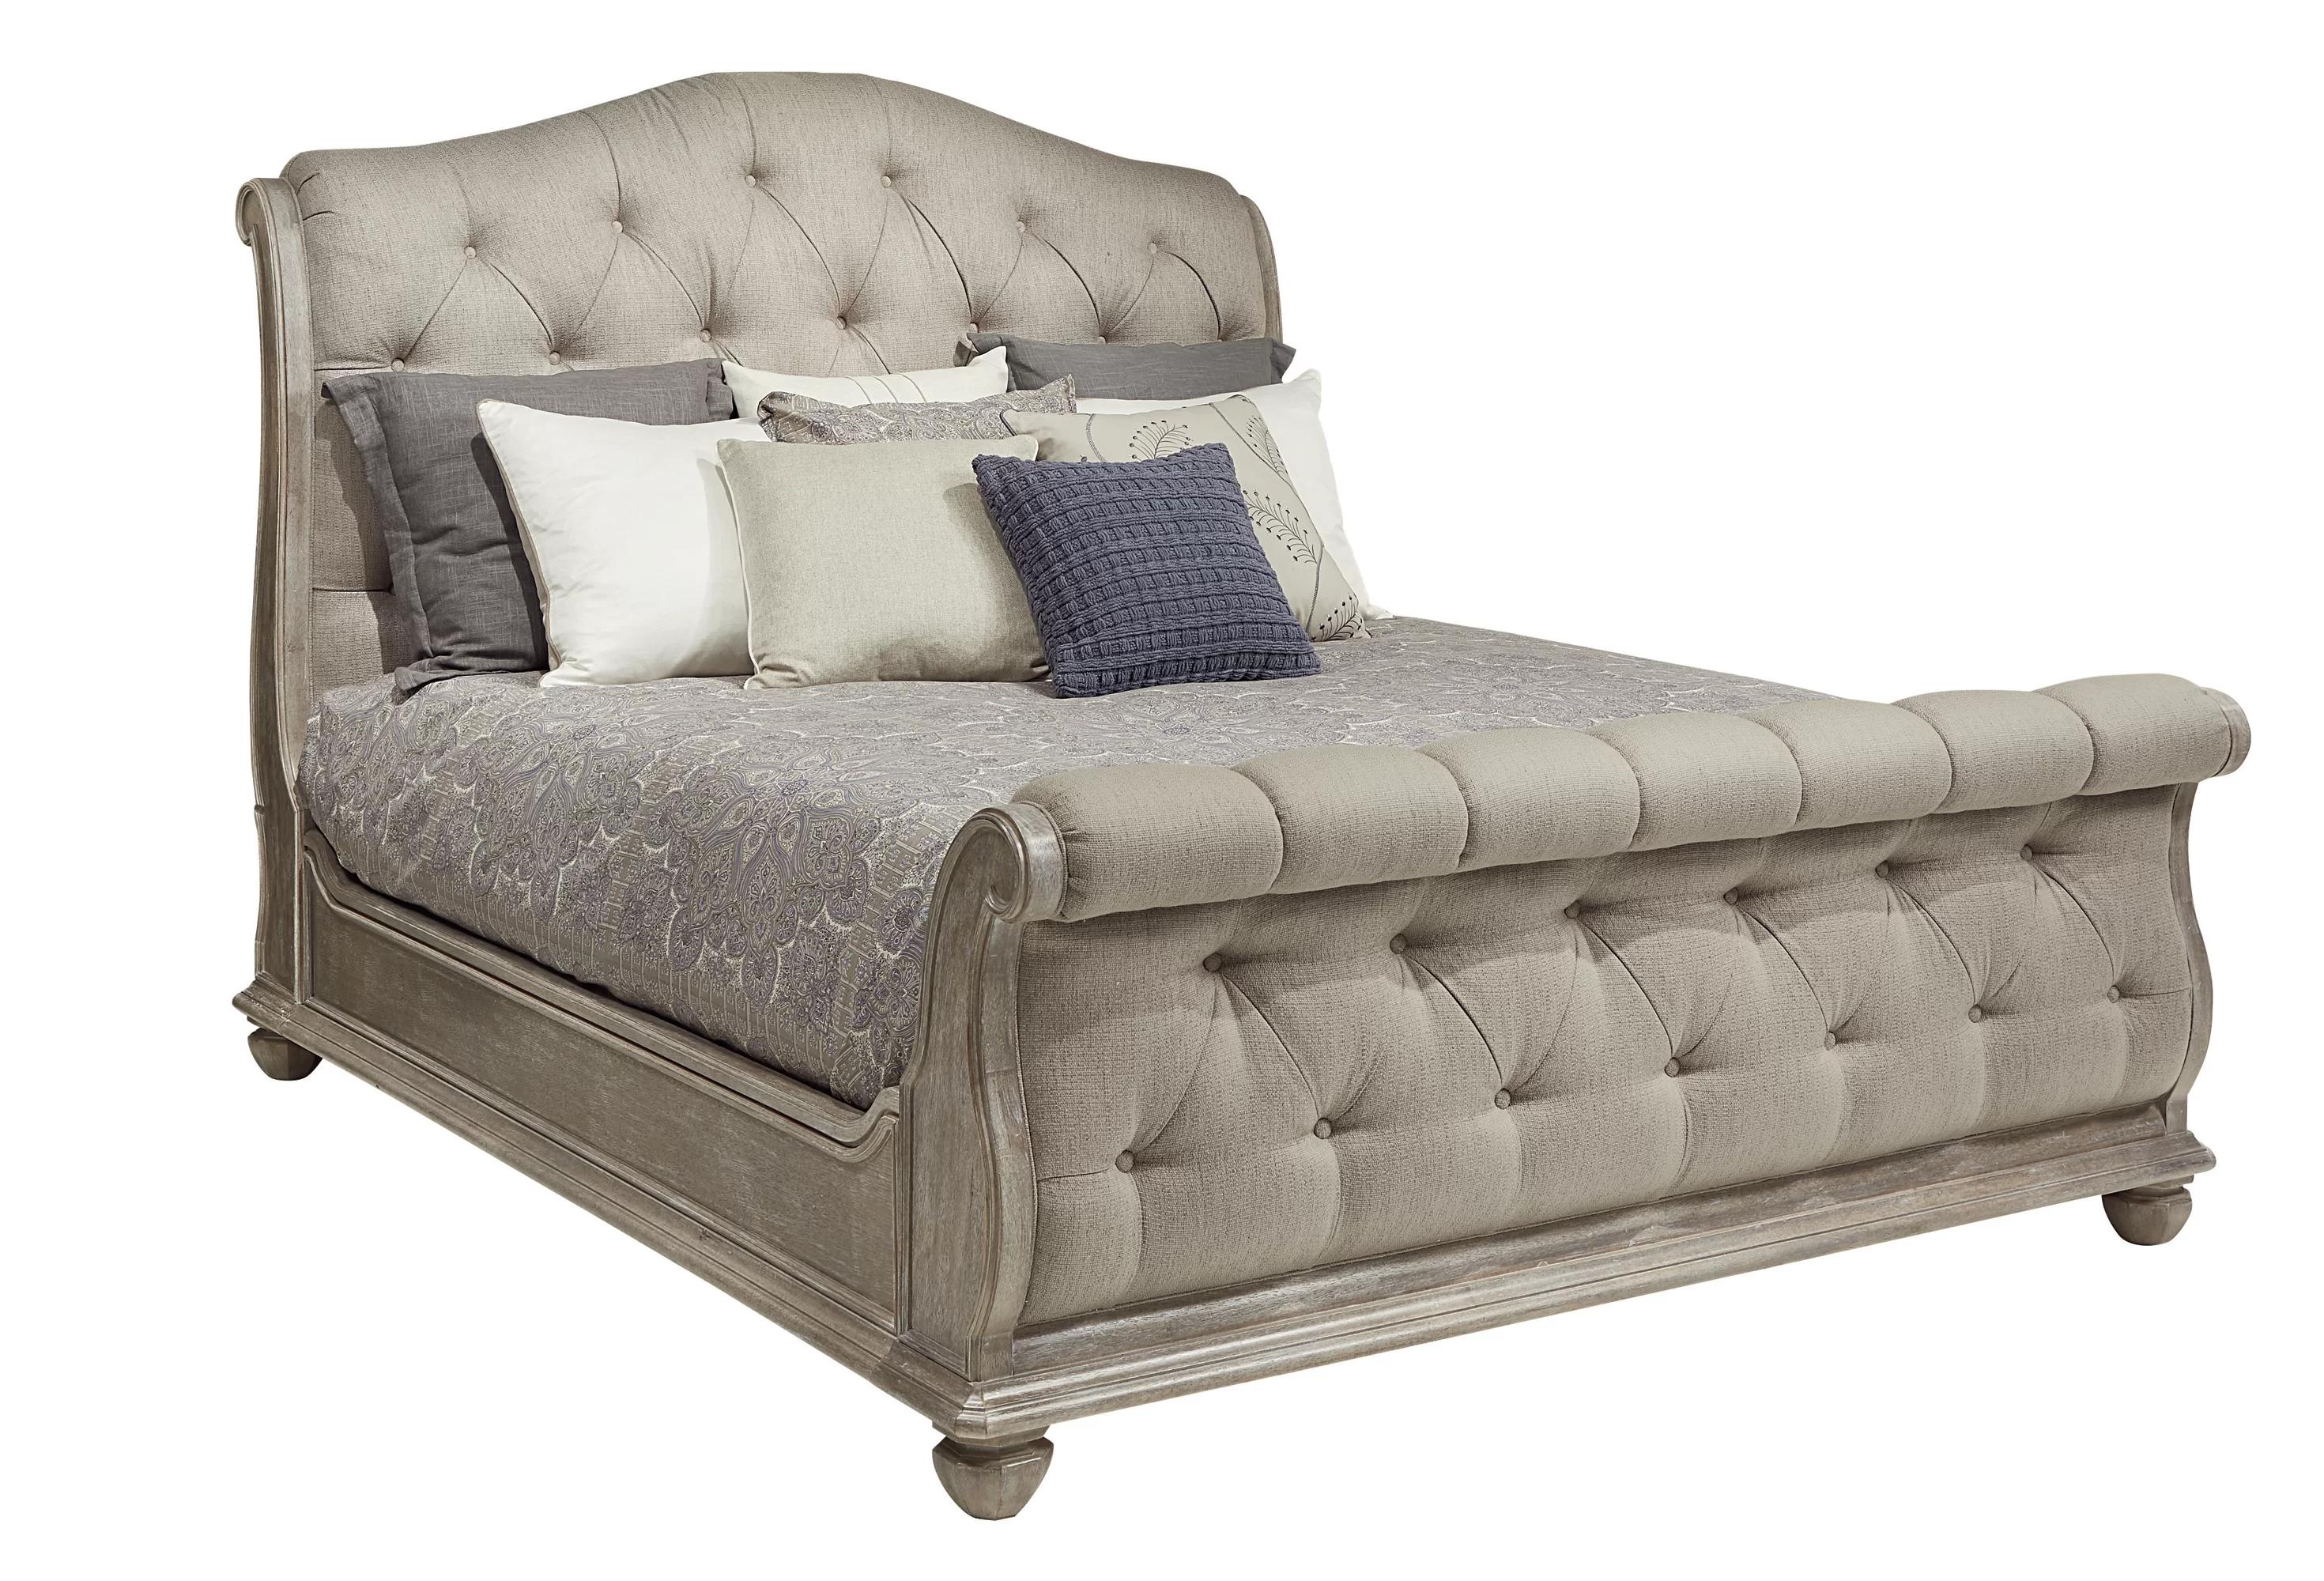 Classic, Traditional Sleigh Bed Summer Creek 251125-1303 in Wash Oak, Beige Fabric